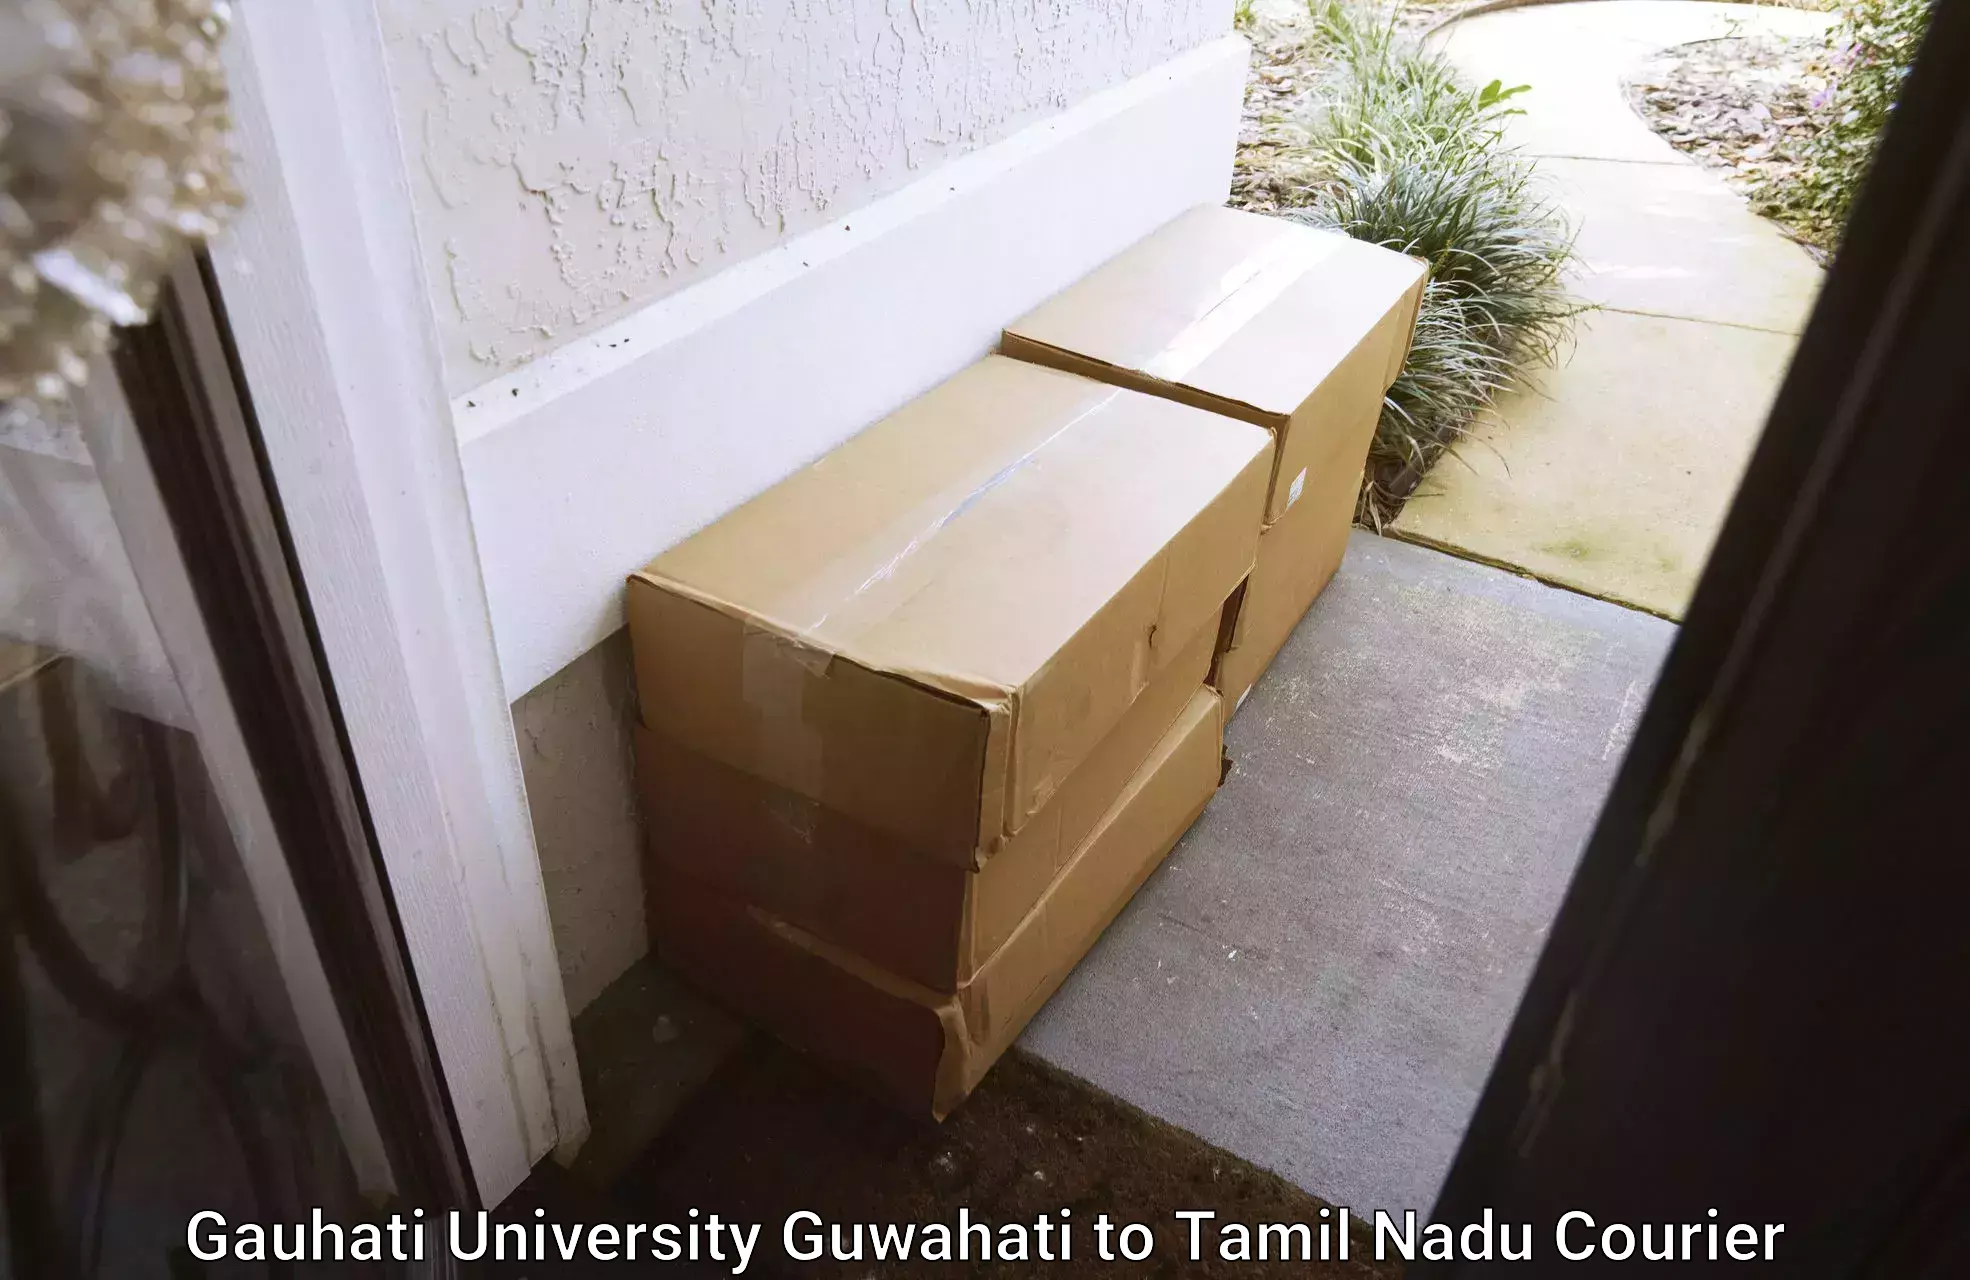 Personalized courier experiences in Gauhati University Guwahati to SRM Institute of Science and Technology Chennai